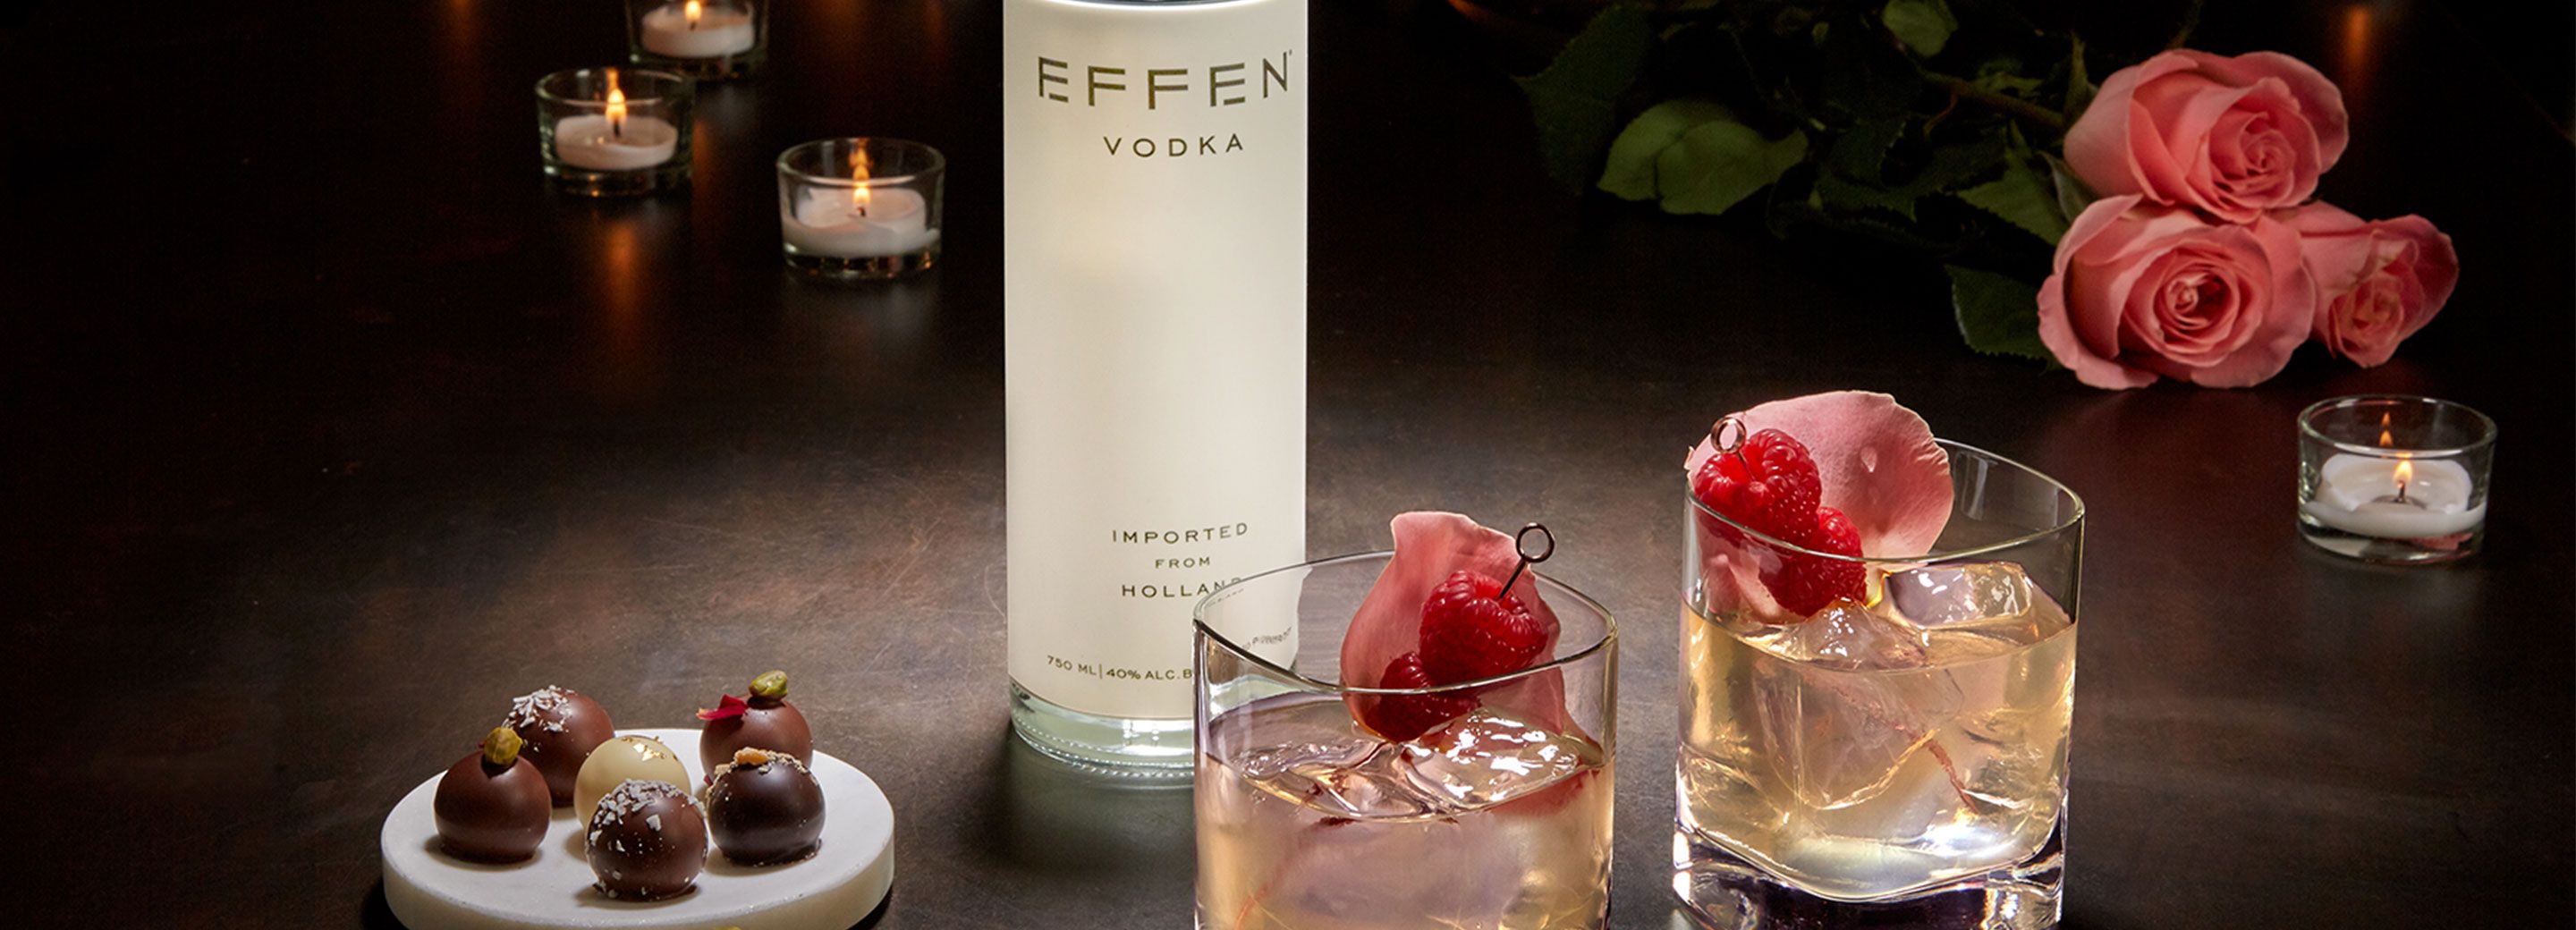 EFFEN Amore Cocktail